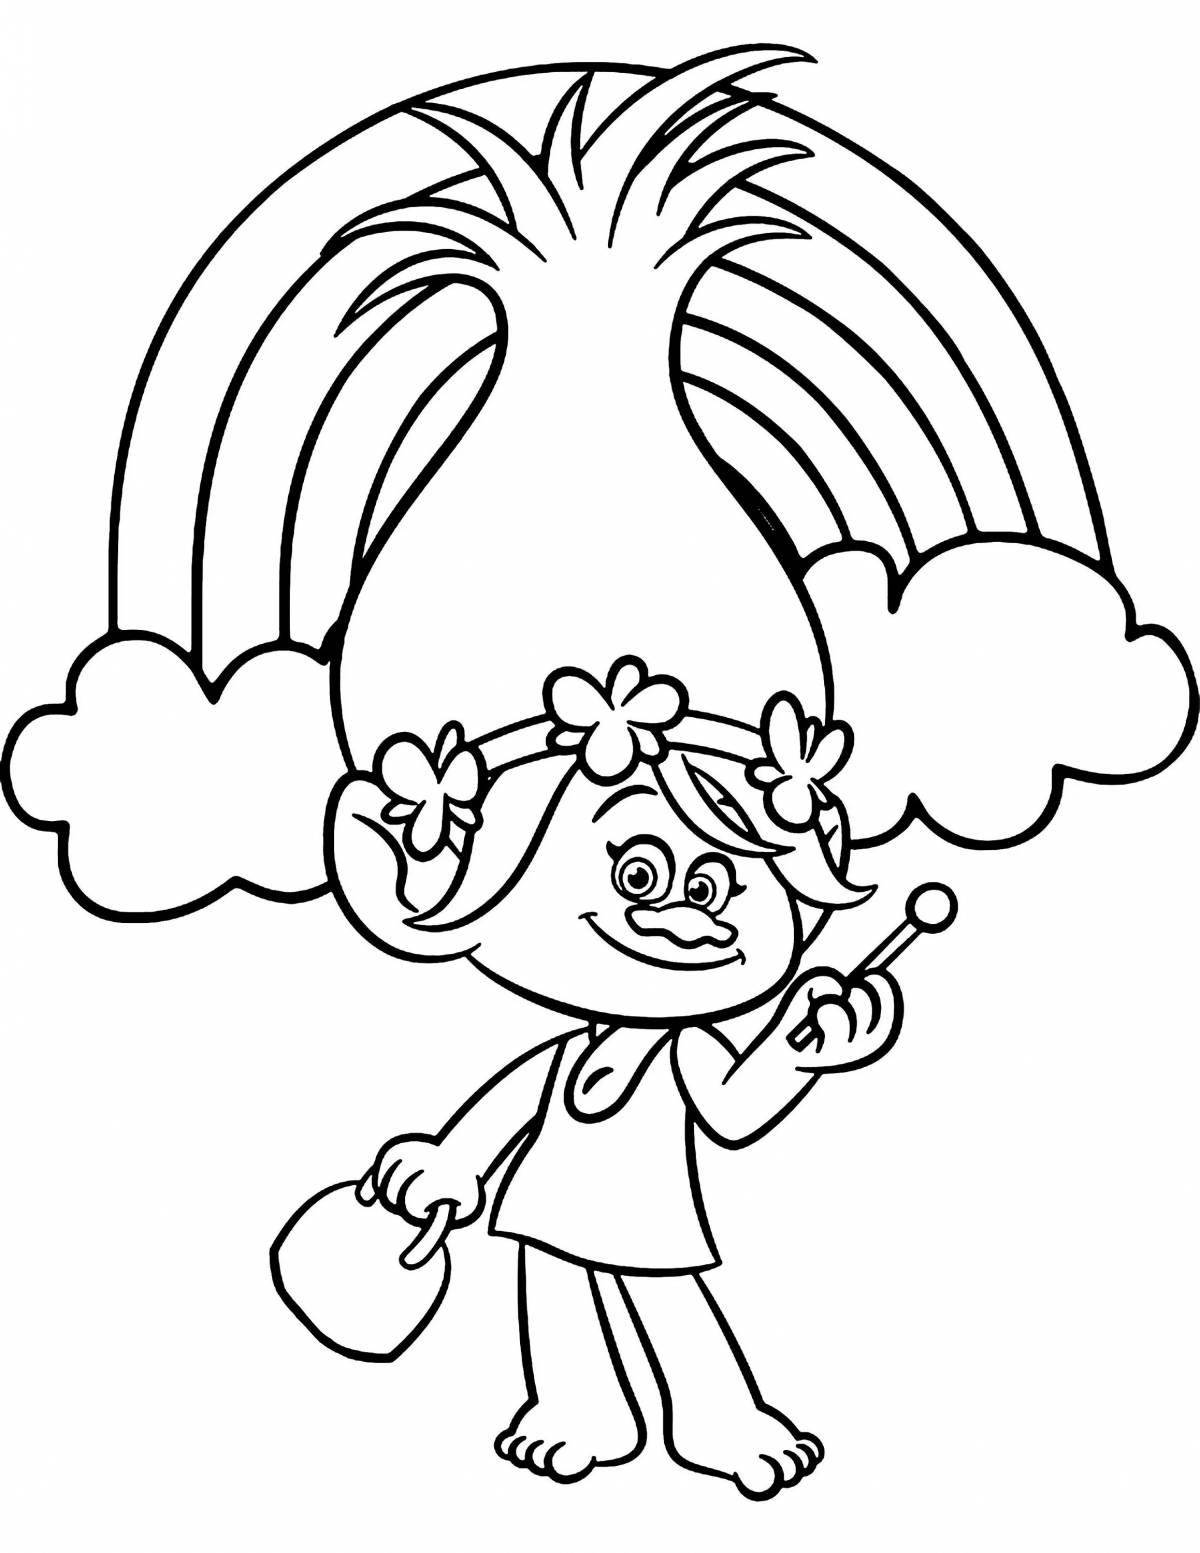 Humorous cartoon trolls coloring pages